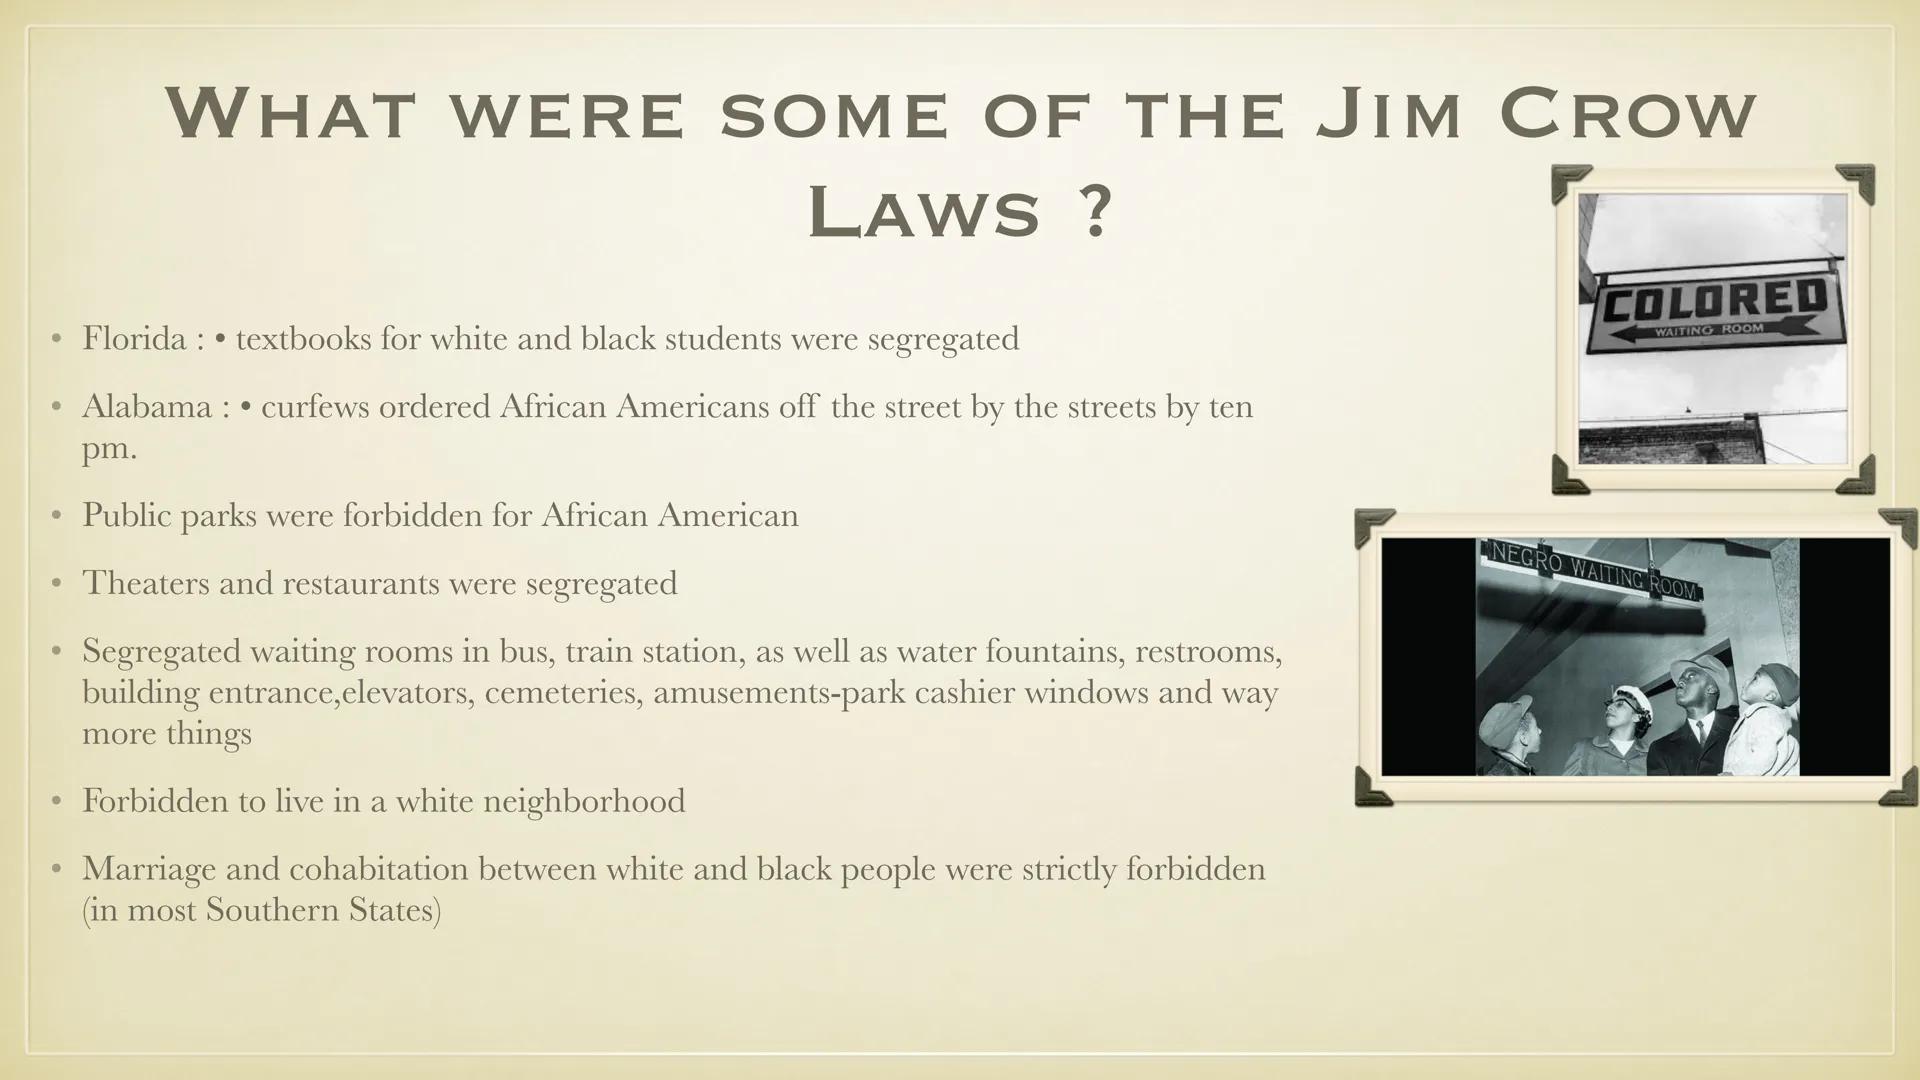 JIM CROW LAWS
THIS PRESENTATION IS FOR
EDUCATIONAL USE AND MAY HAVE
SOME DISTURBING IMAGES
25.10.21
MICHELLE SOPHIE DISCHINGER ●
●
●
●
●
●
●